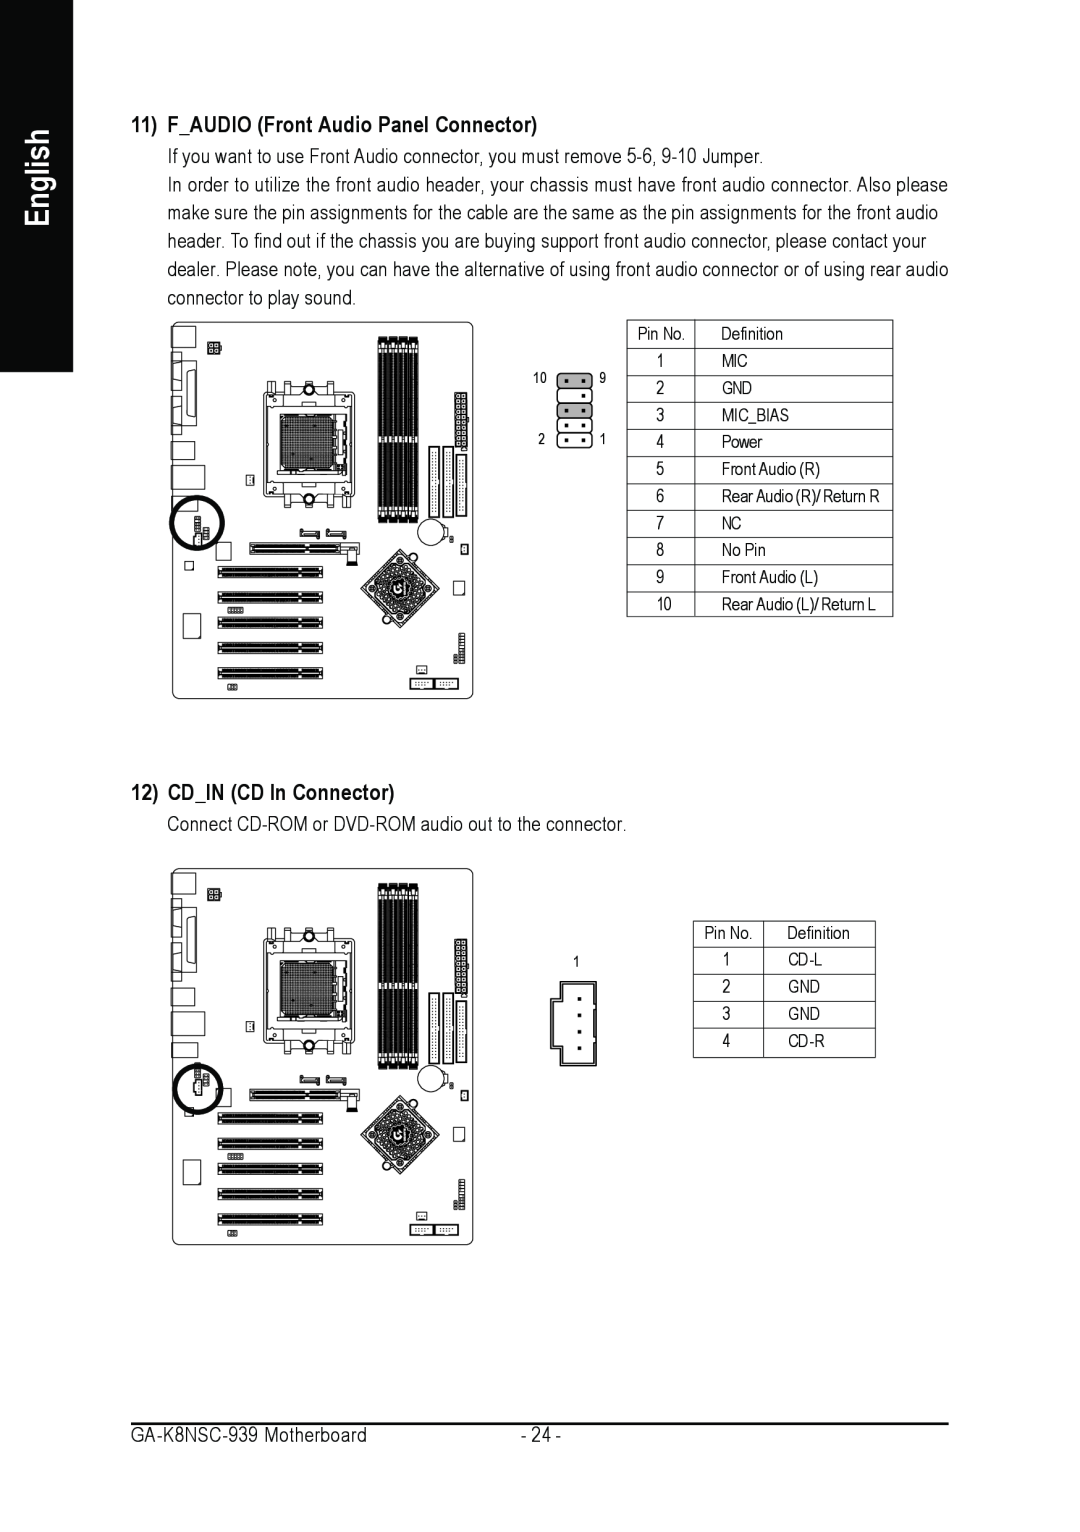 AMD GA-K8NSC-939 user manual FAUDIO Front Audio Panel Connector, CDIN CD In Connector, English 